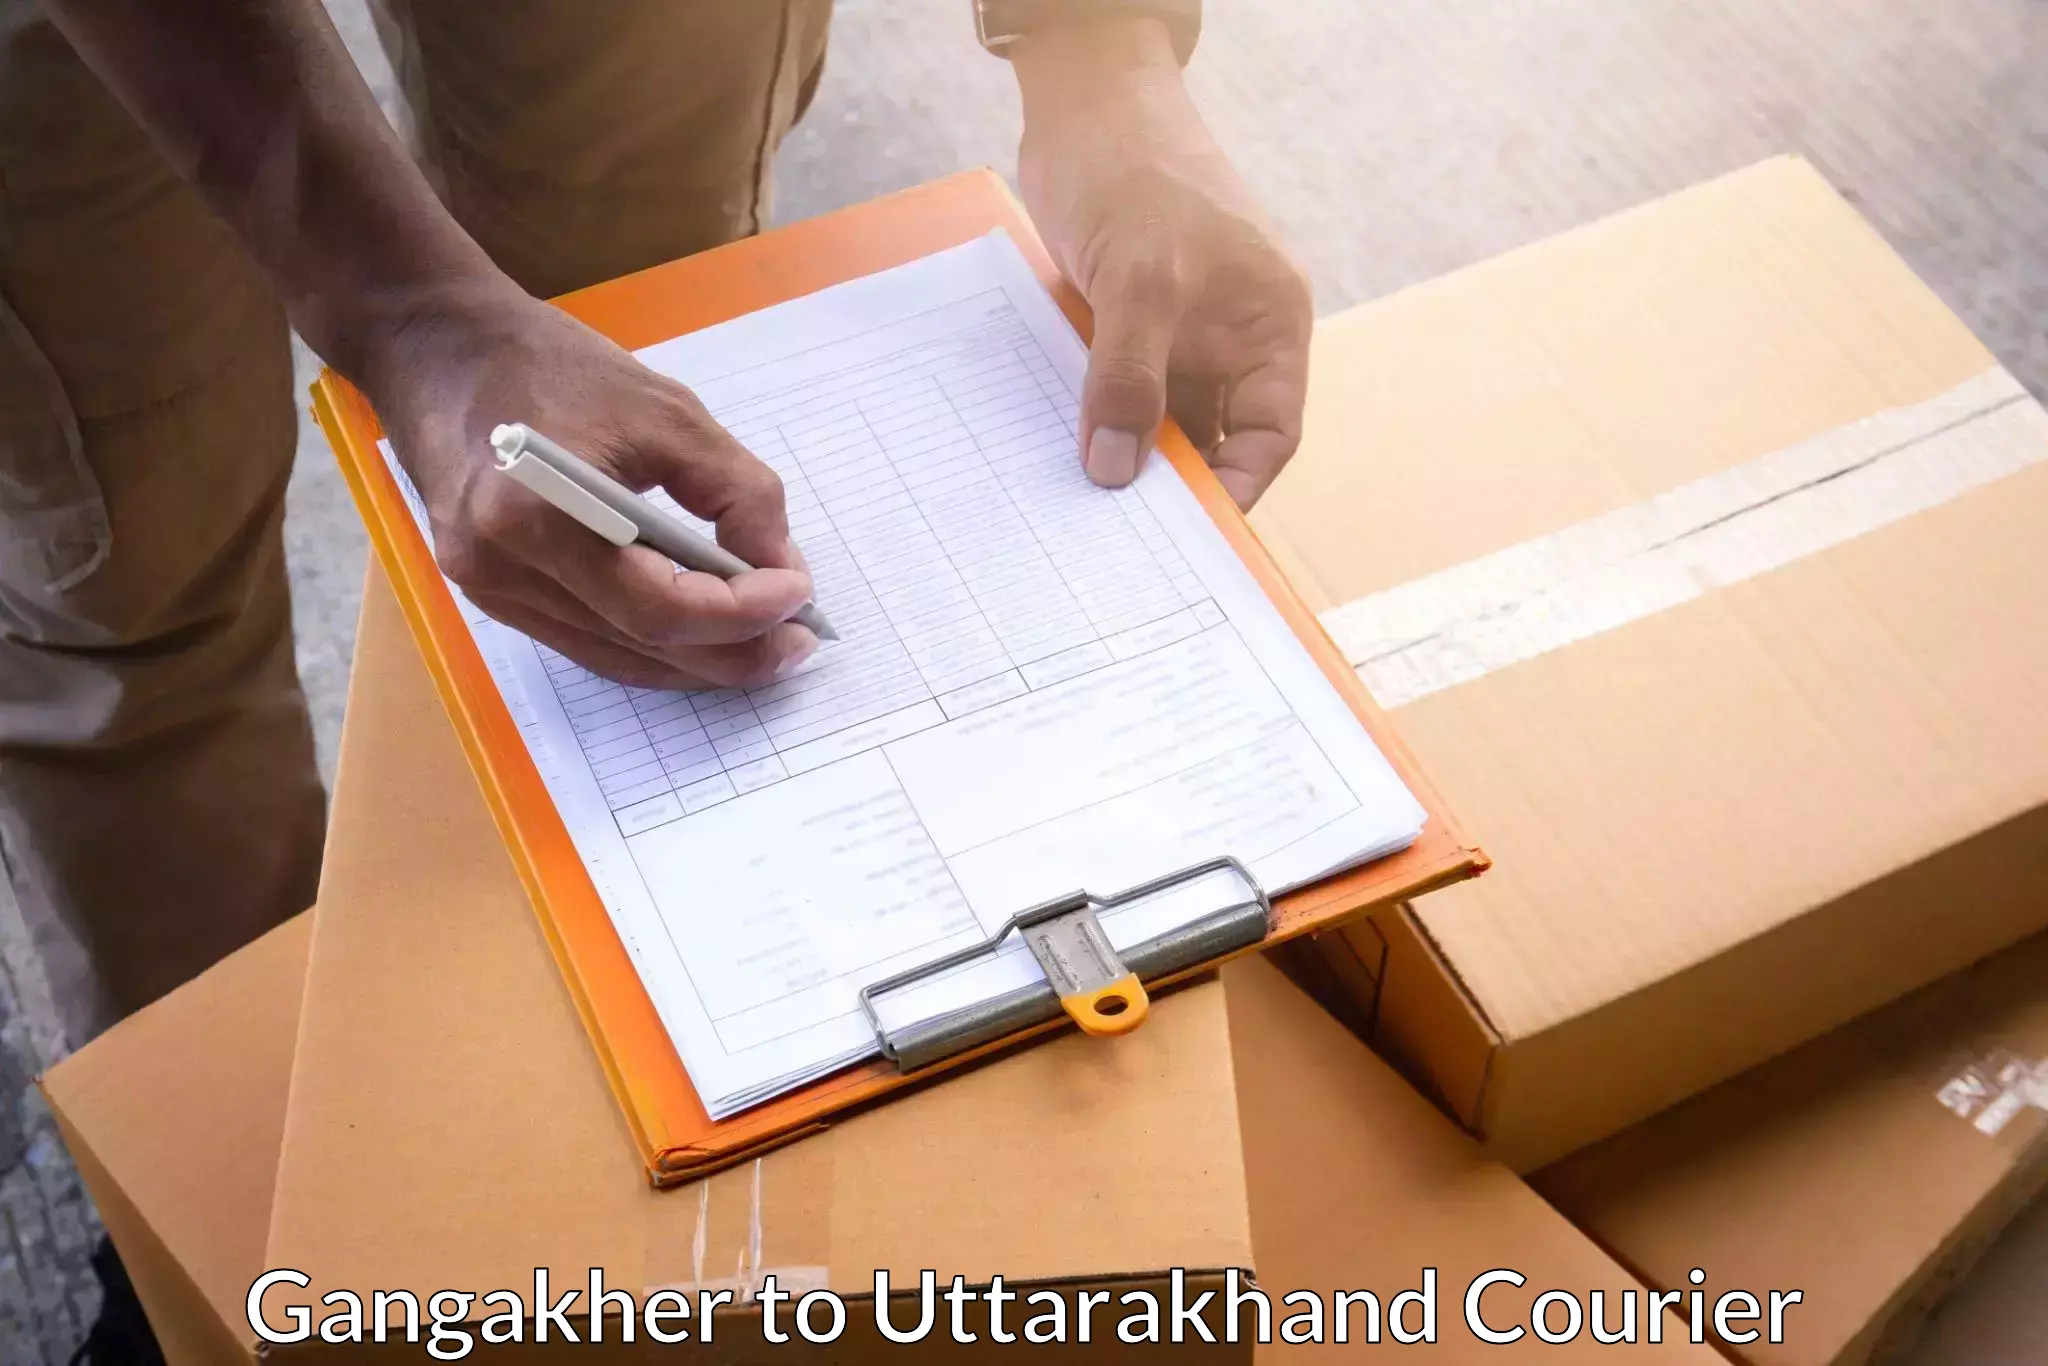 Next-day delivery options Gangakher to Dehradun